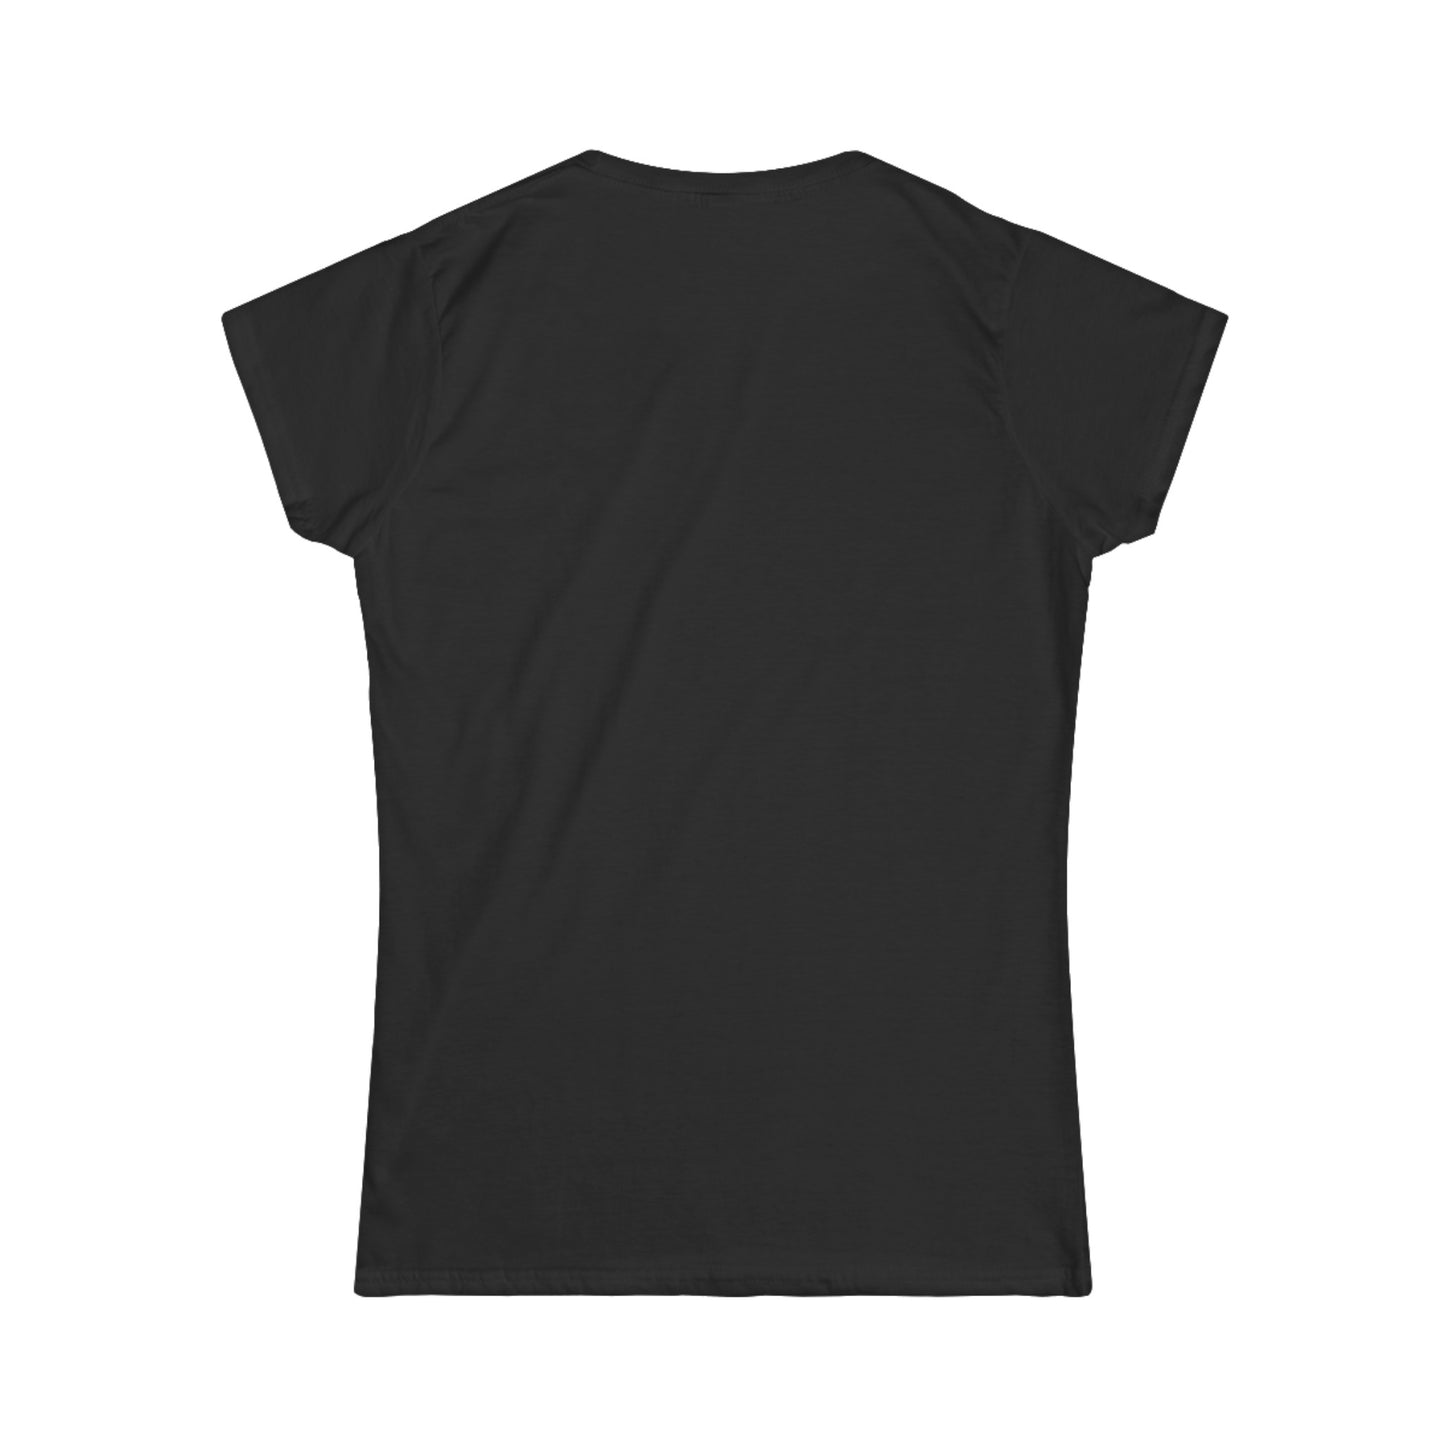 Nadia's Paige® Limited Edition The Dancers Logo Feminine Softstyle Tee